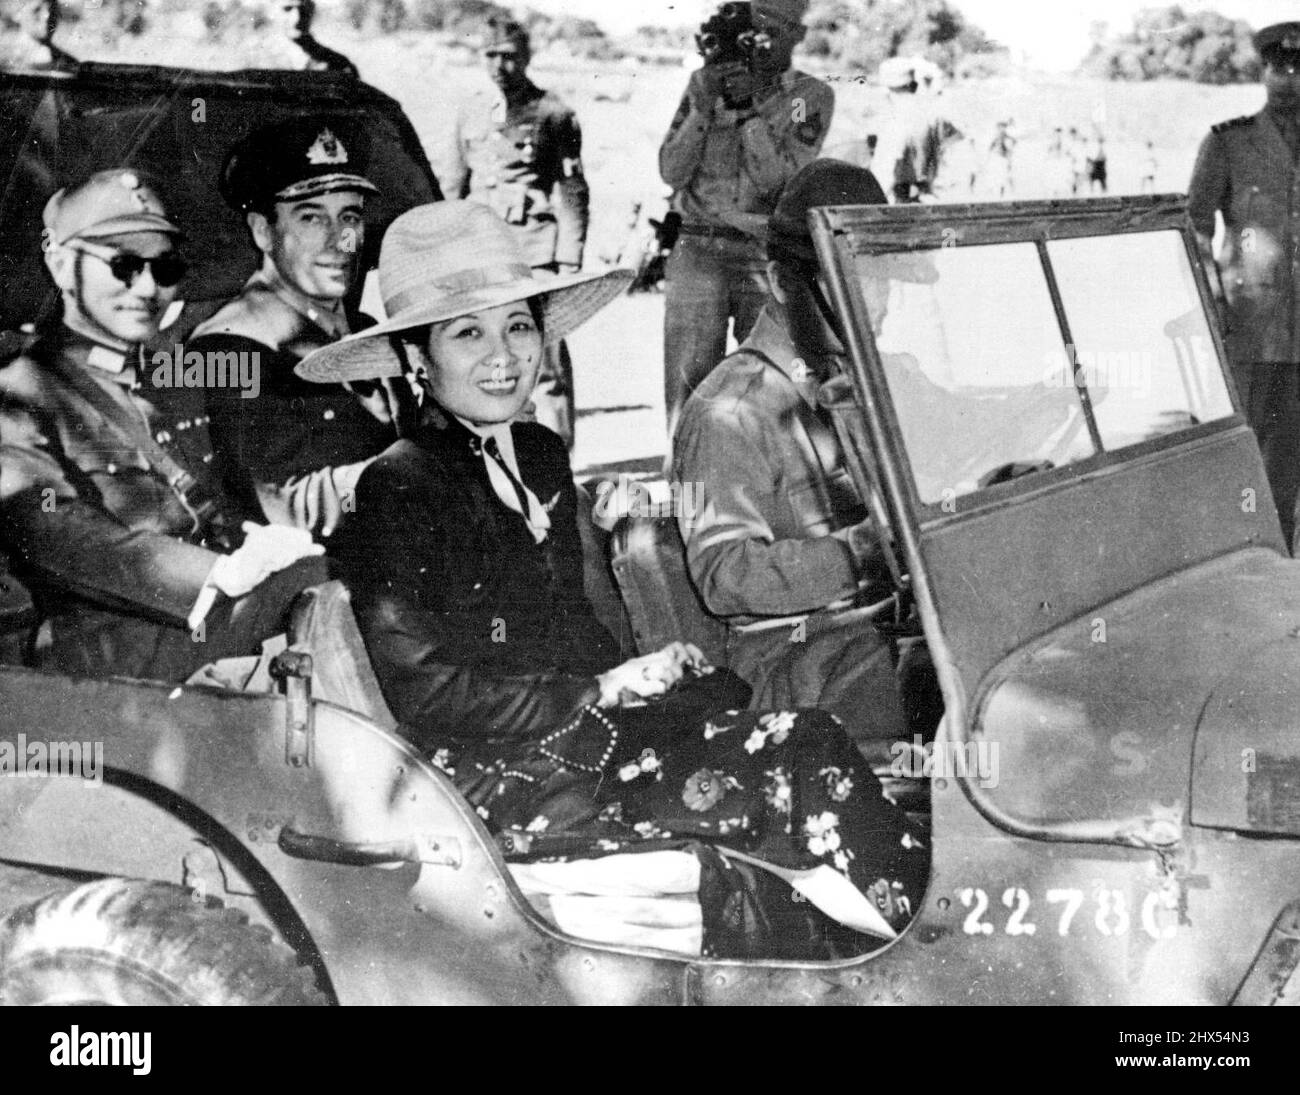 Generalissimo Chiang Kai-Shek Inspects Training Centre For Chinese Soldiers In India -- Generalissimo Chiang Kai-shek takes his place at the side of Admiral Lord Louis Mountbatten, Supreme Allied Commander, South-East Asia, while Mme. Chiang Kai-shek sits beside the Jeep driver, during a tour of training centres in Eastern India, where Chinese soldiers are under the instruction of U.S. Army officers.Following the Cairo Conference Generalissimo Chiang Kai-Shek and Mme. Chiang Kai-Shek stopped in India on the return journey to China, and visited a number of training centres where Chinese soldier Stock Photo